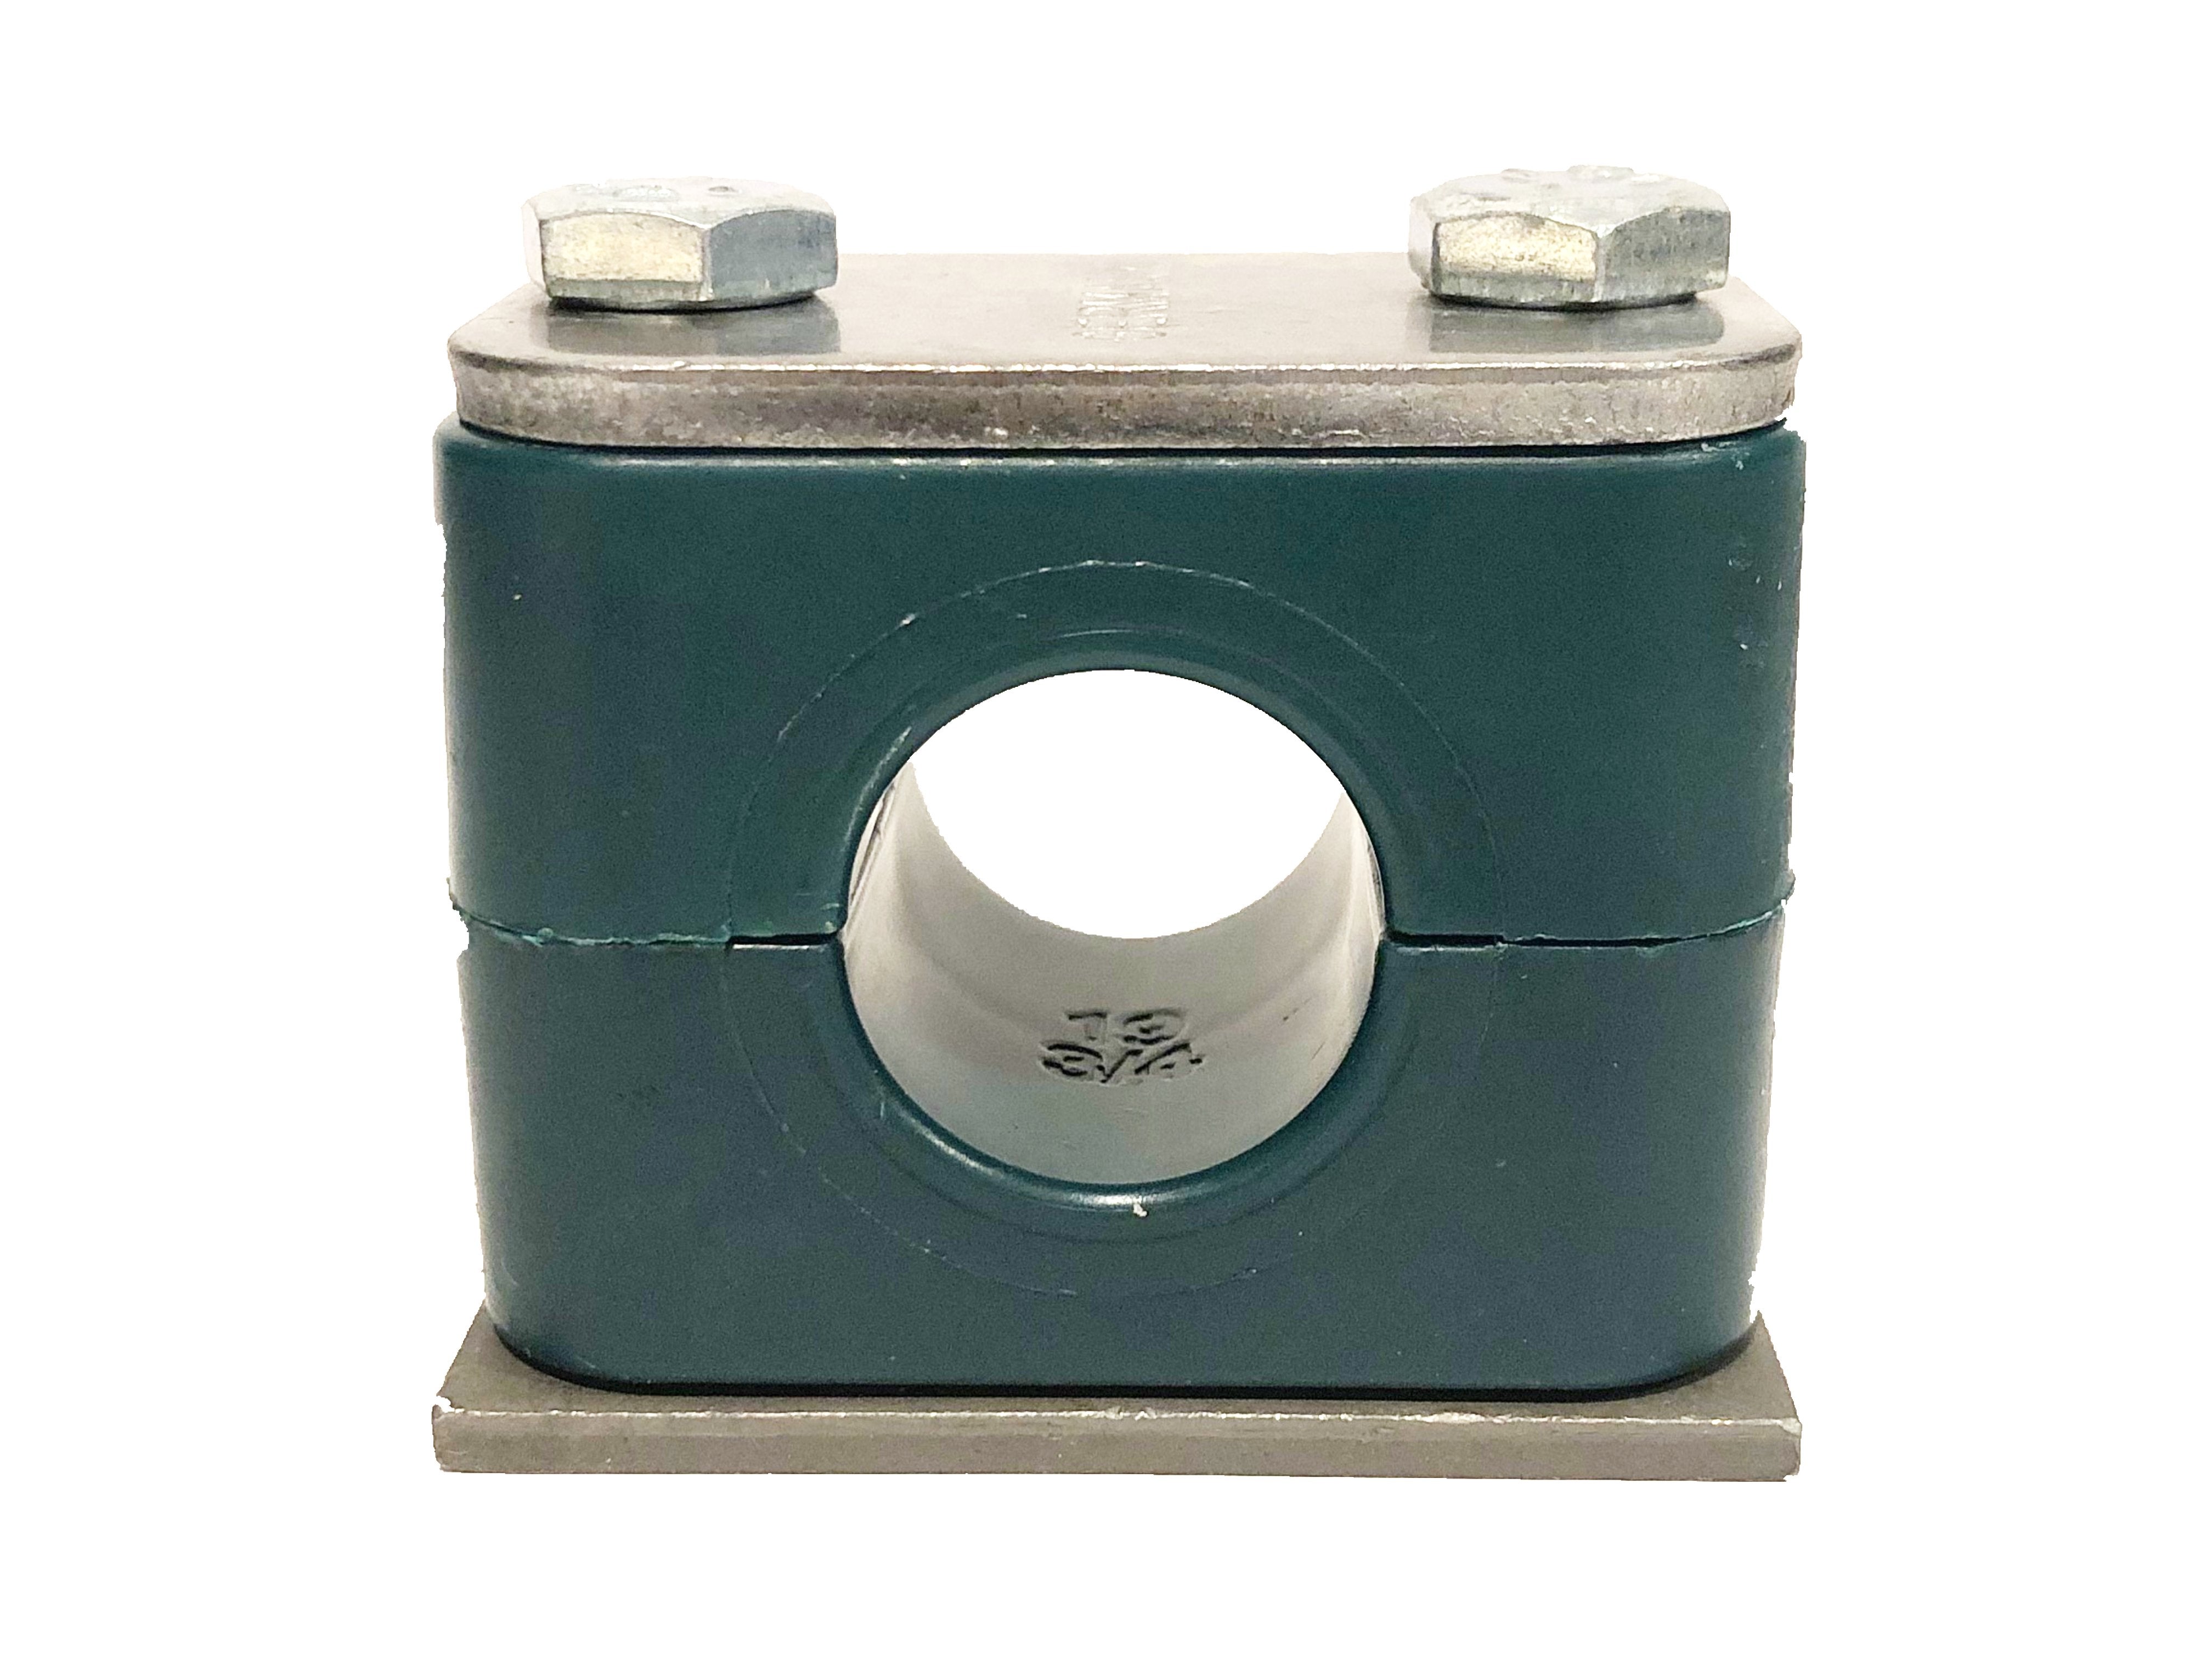 SP-533.7-PP-H-DP-AS-U-W10 : Stauff Clamp, Single Weld Plate, 1.327" (33.7mm) OD, for 1" Pipe, Green PP Insert, Smooth Interior, Carbon Steel